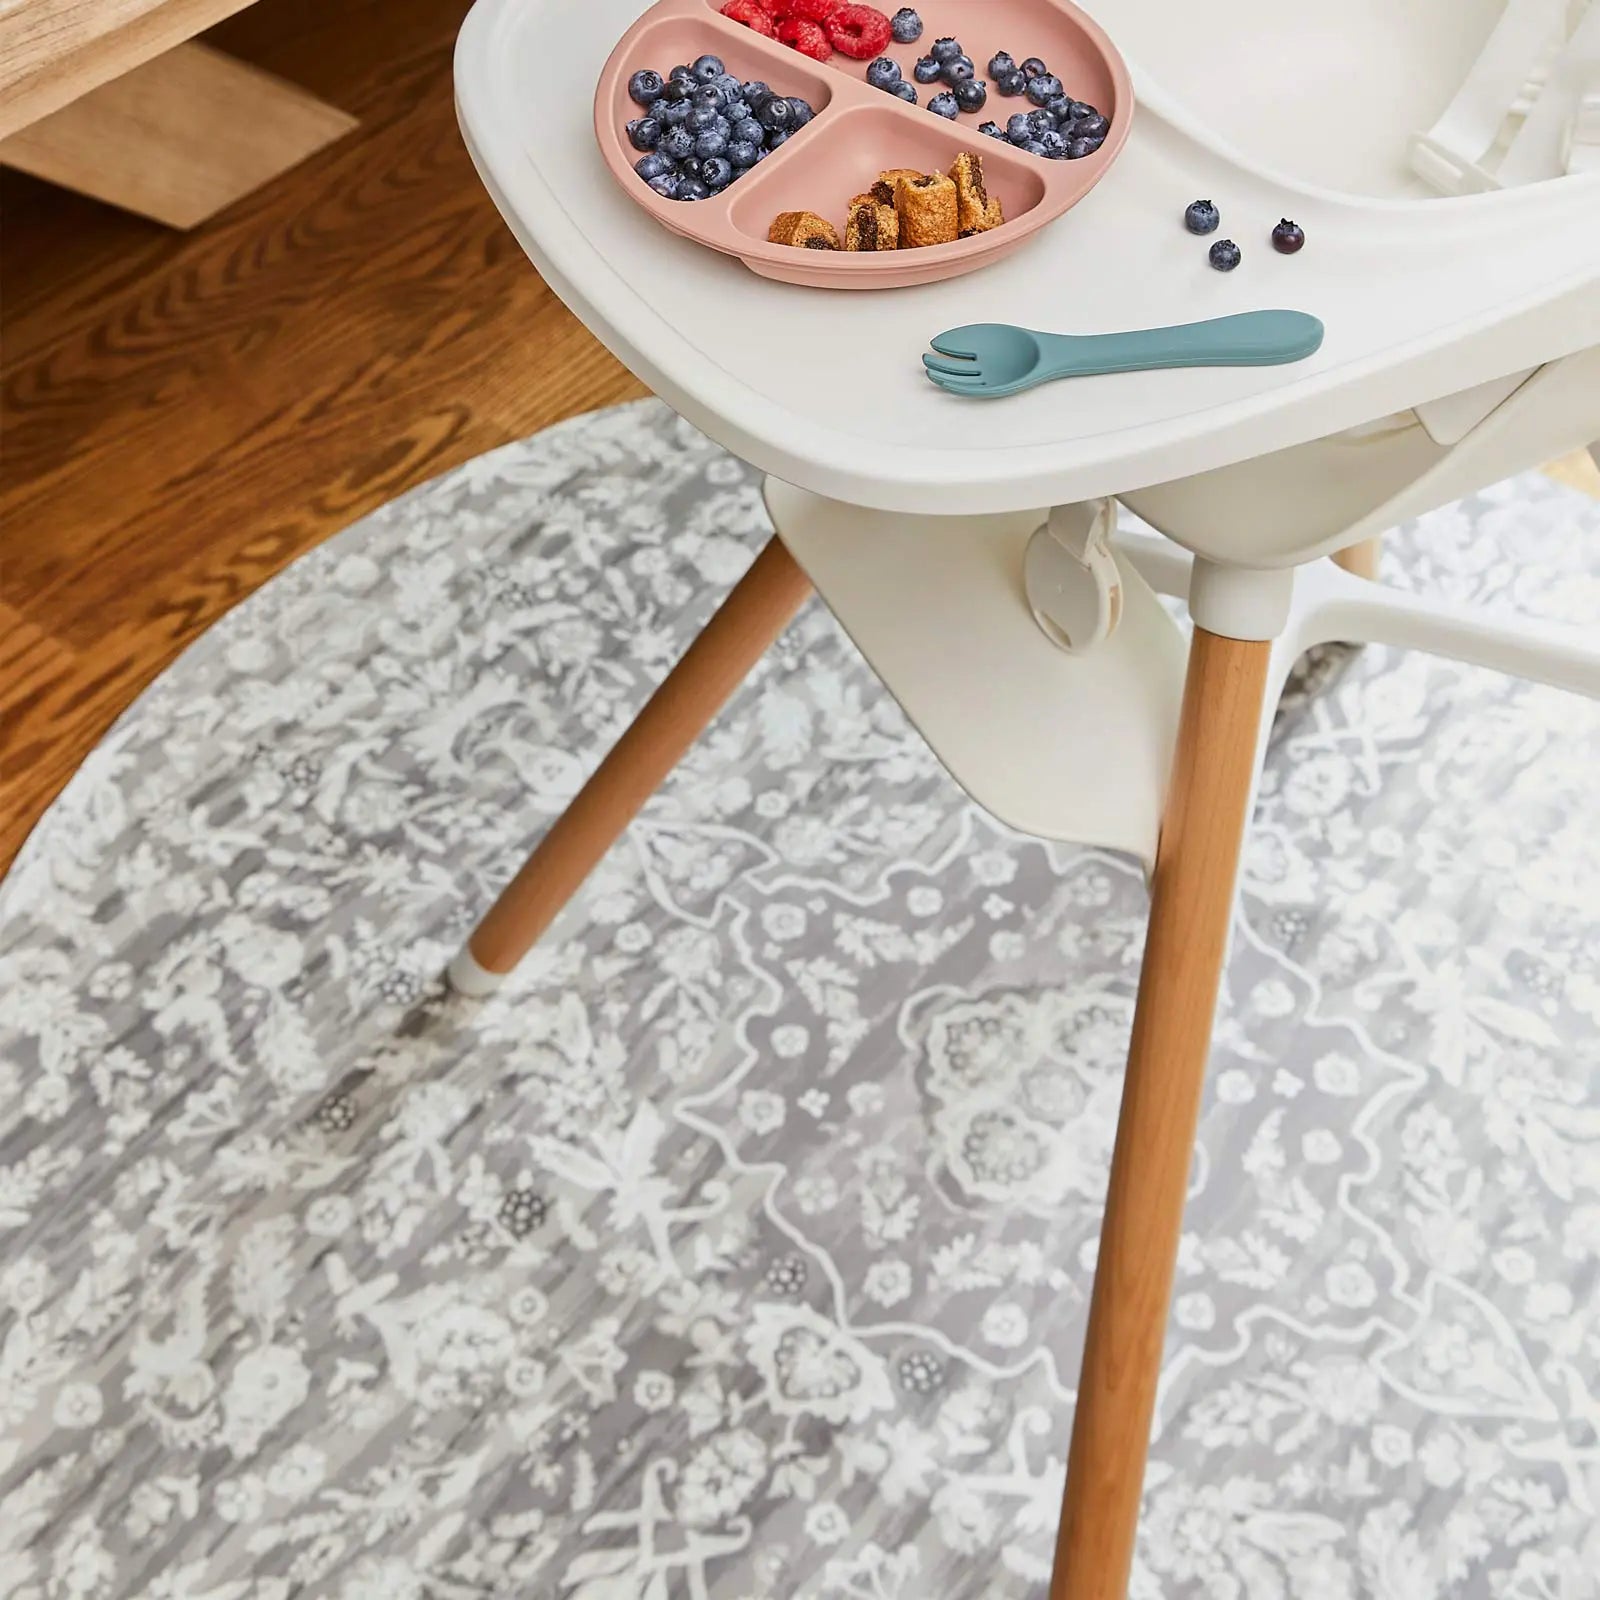 Emile earl grey neutral grey and white vintage floral print high chair mat shown underneath a highchair with fruit and cookies on the tray